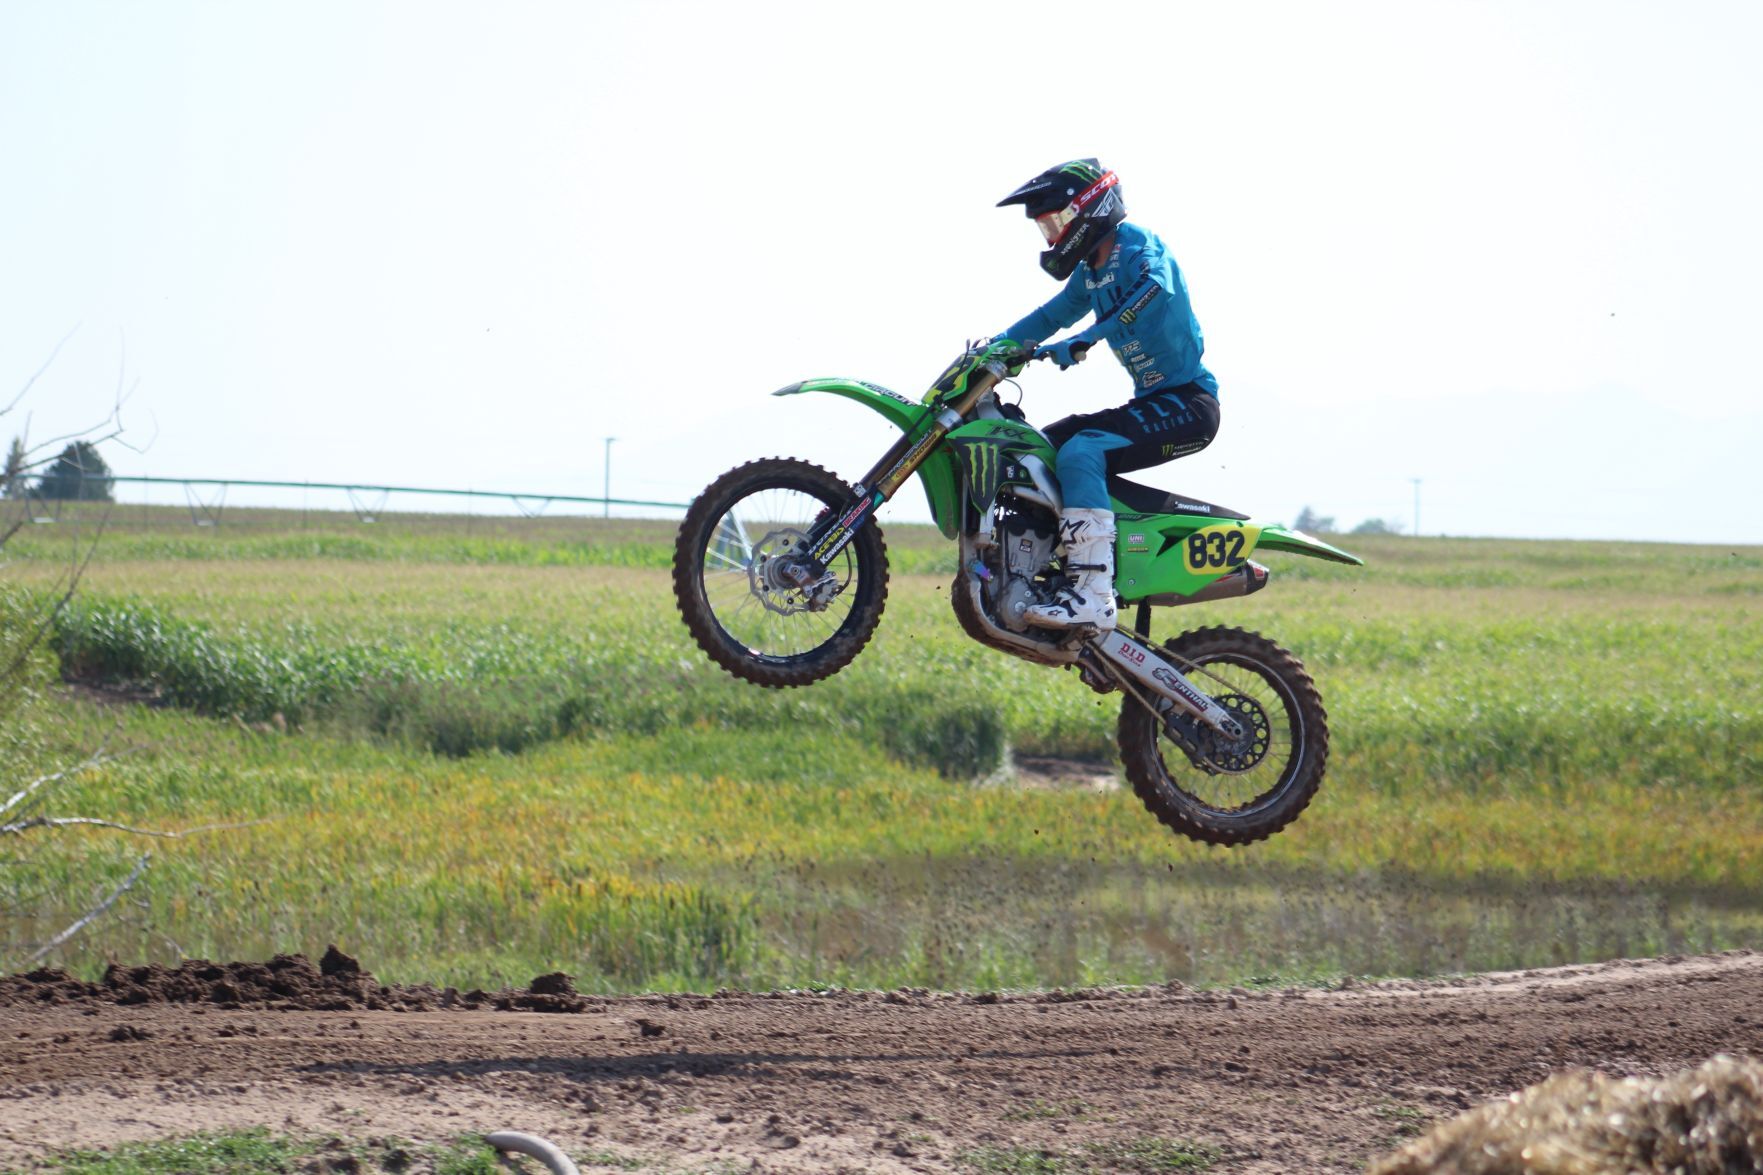 Fairviews field of dreams helped put Idaho on motocross map Local News hjnews hq nude picture